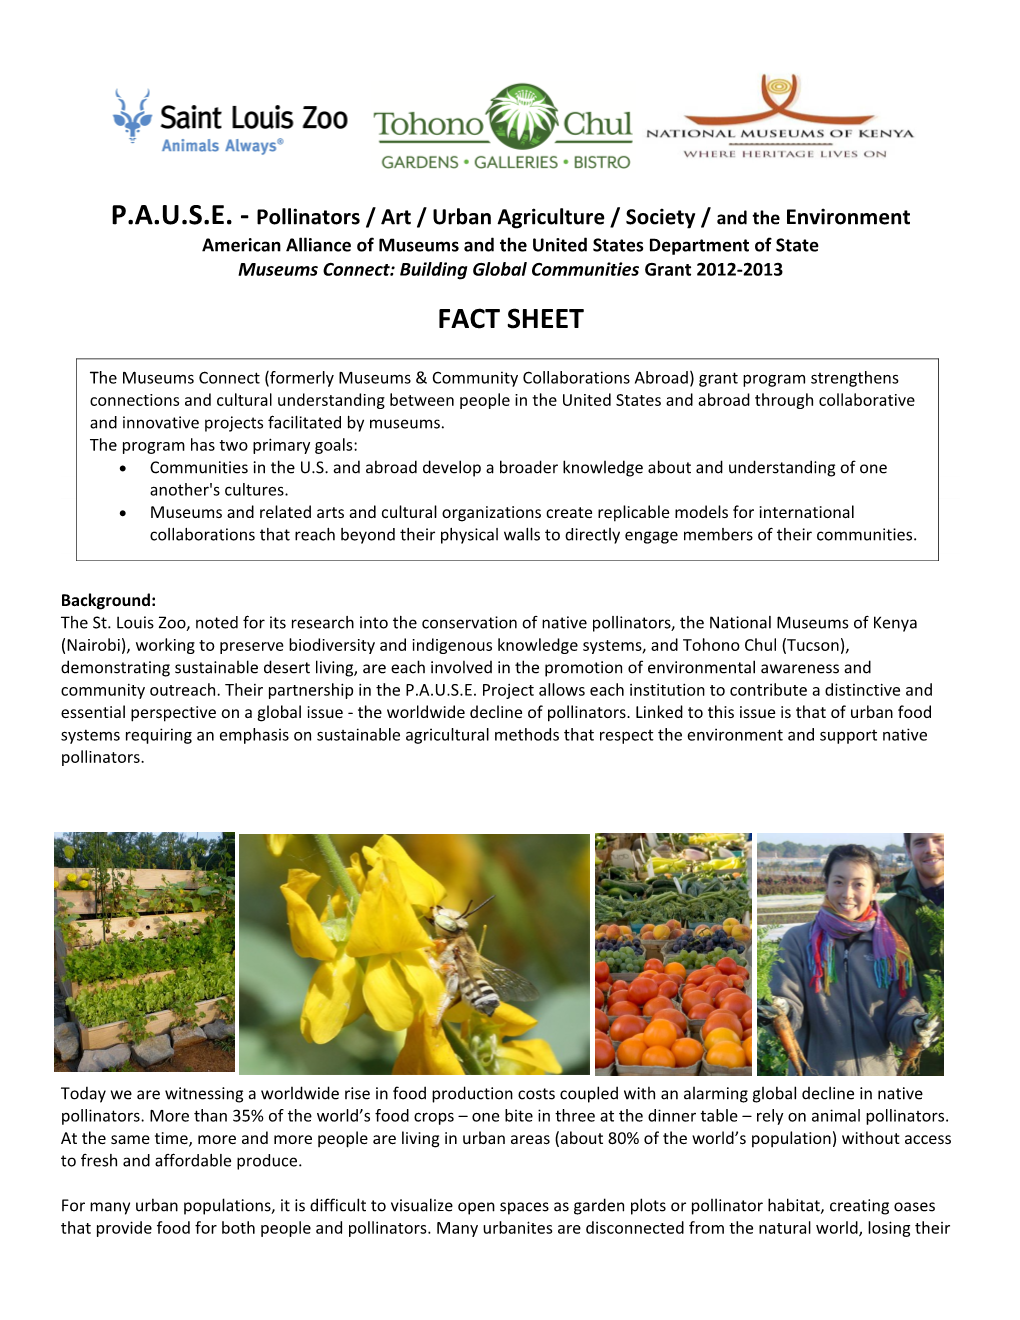 P.A.U.S.E. - Pollinators / Art / Urban Agriculture / Society / and the Environment